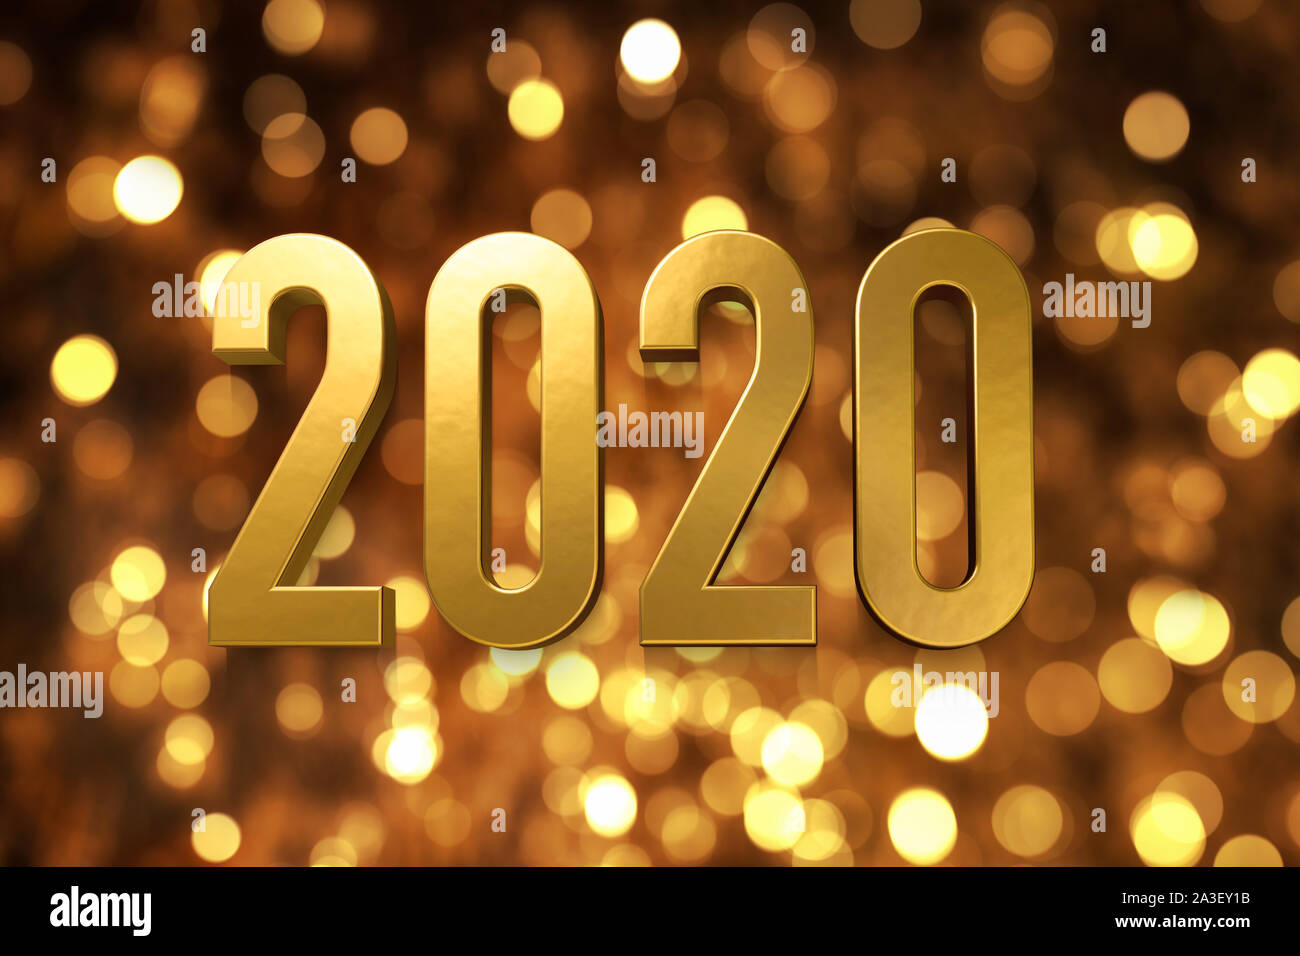 Illustration for new year 2020 with shiny and gold colors. Stock Photo